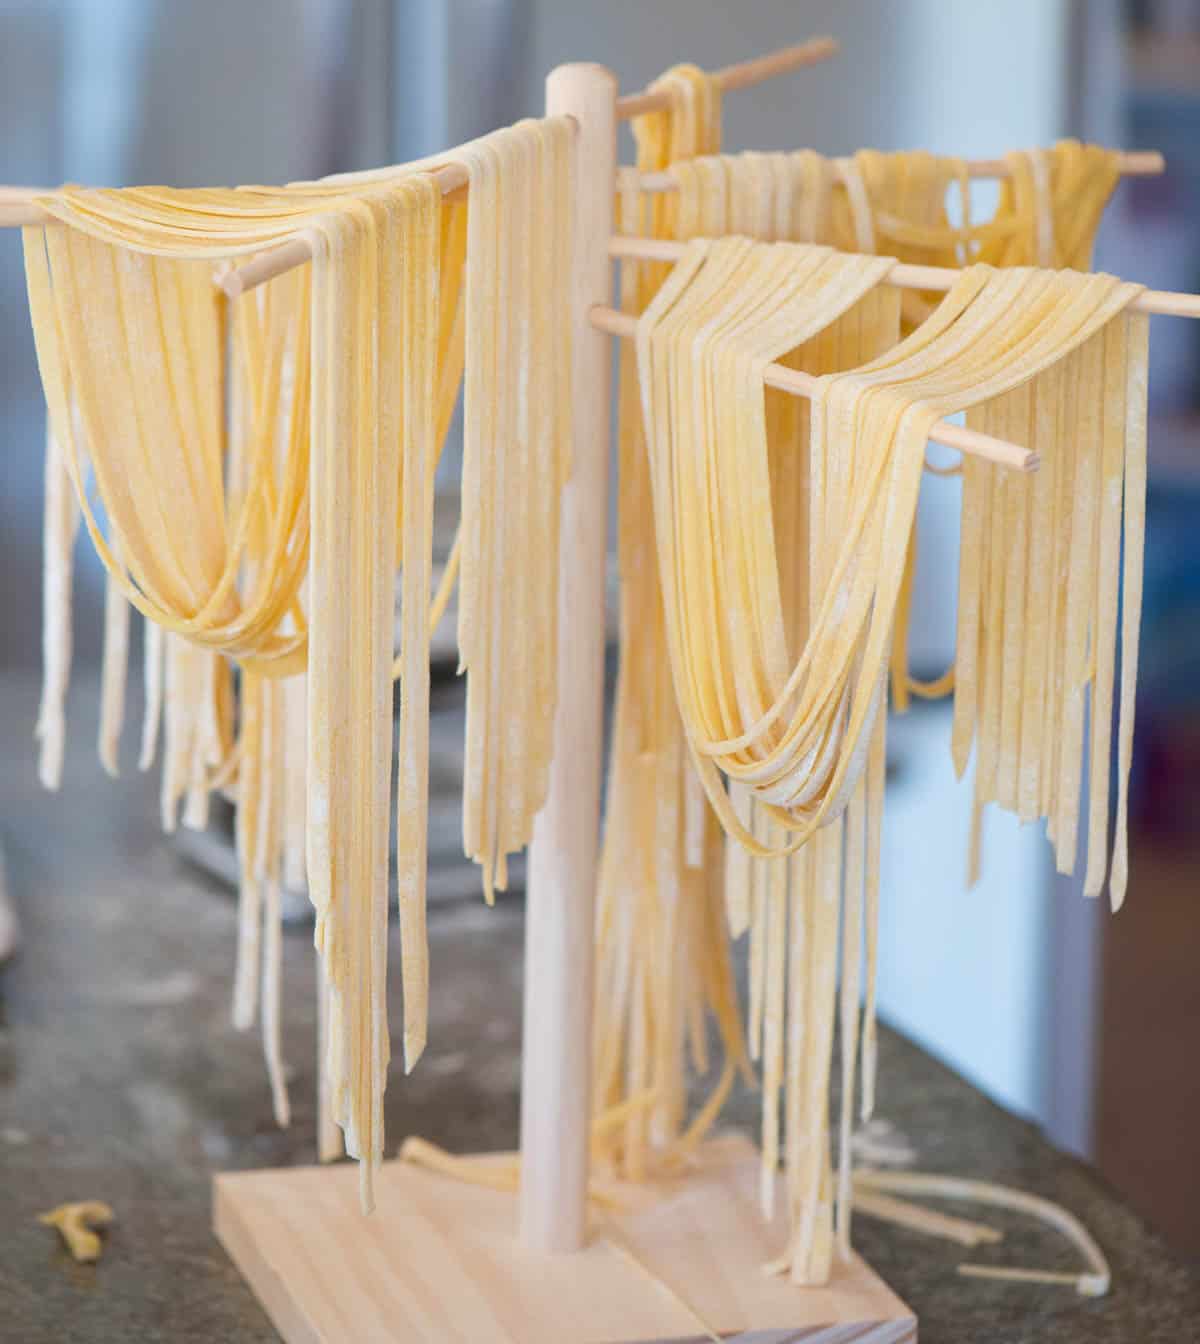 homemade pasta noodles hanging on drying rack.